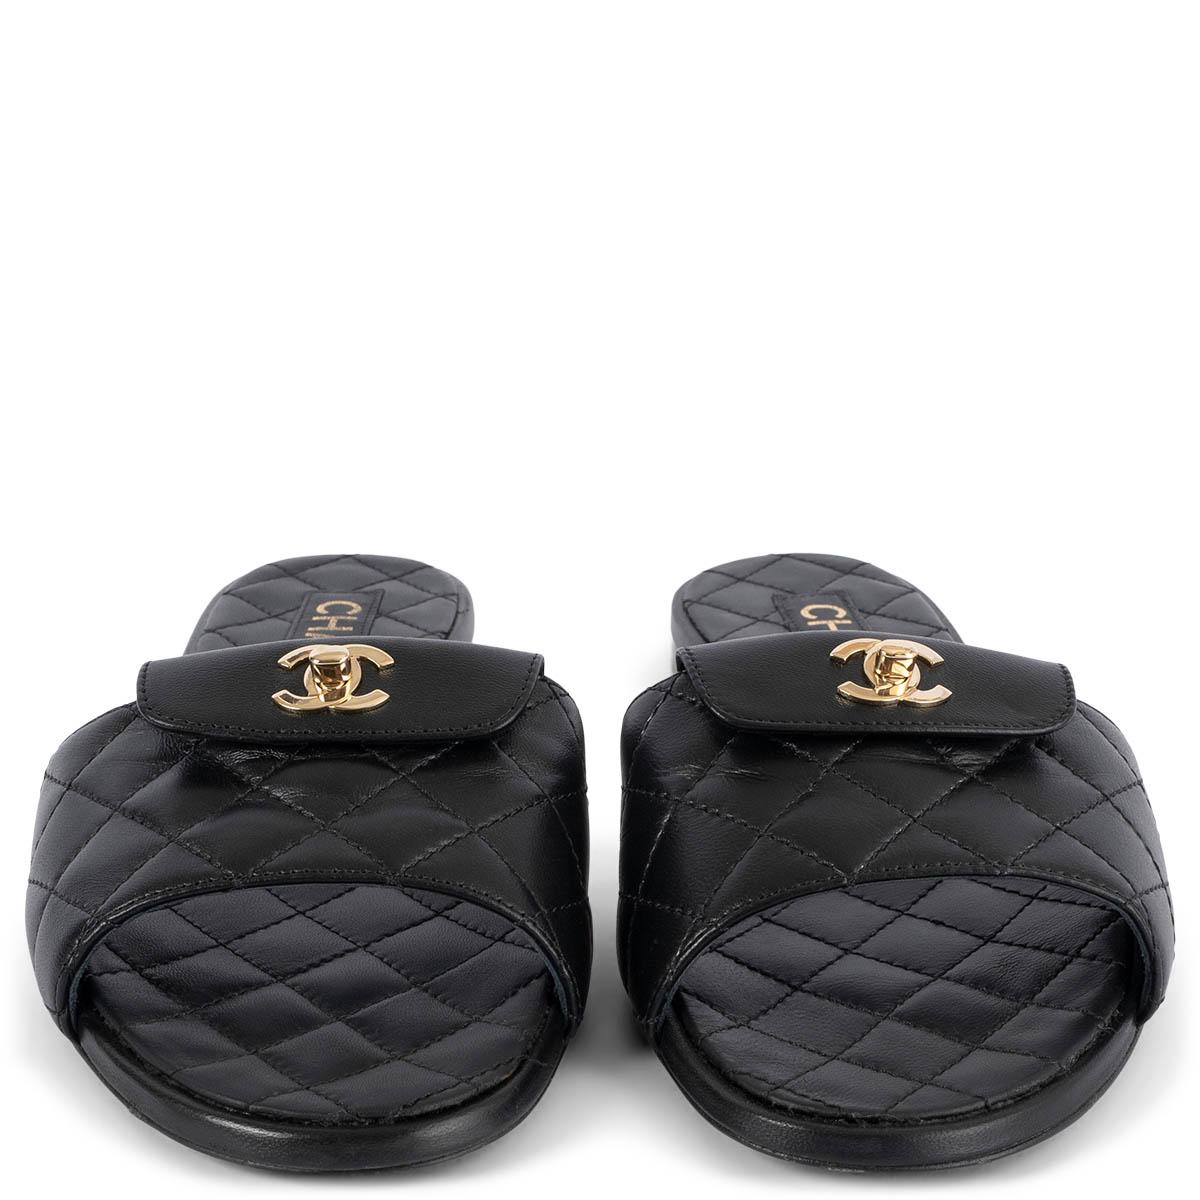 100% authentic Chanel 2022 quilted turnlock slides in black calfskin featuring light gold-tone hardware. Have been worn and are in excellent condition. 

Measurements
Model	Chanel22S G38232 X01000 94305
Imprinted Size	39C (run small)
Shoe